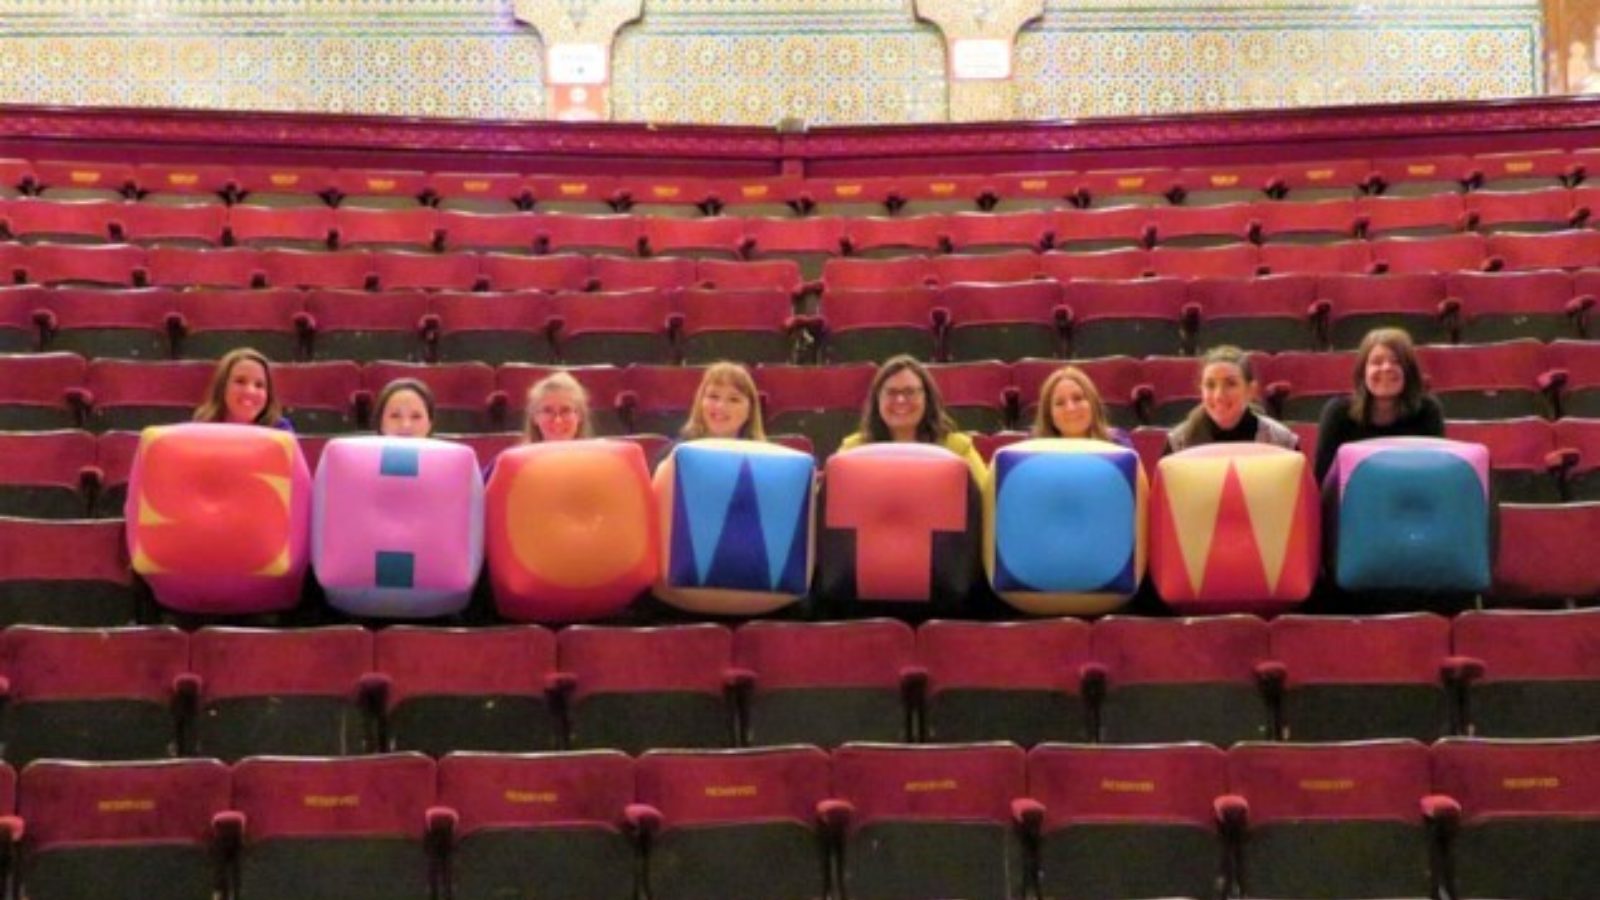 Showtown team, surrounded by theatre chairs, holding inflatable letters spelling Showtown.